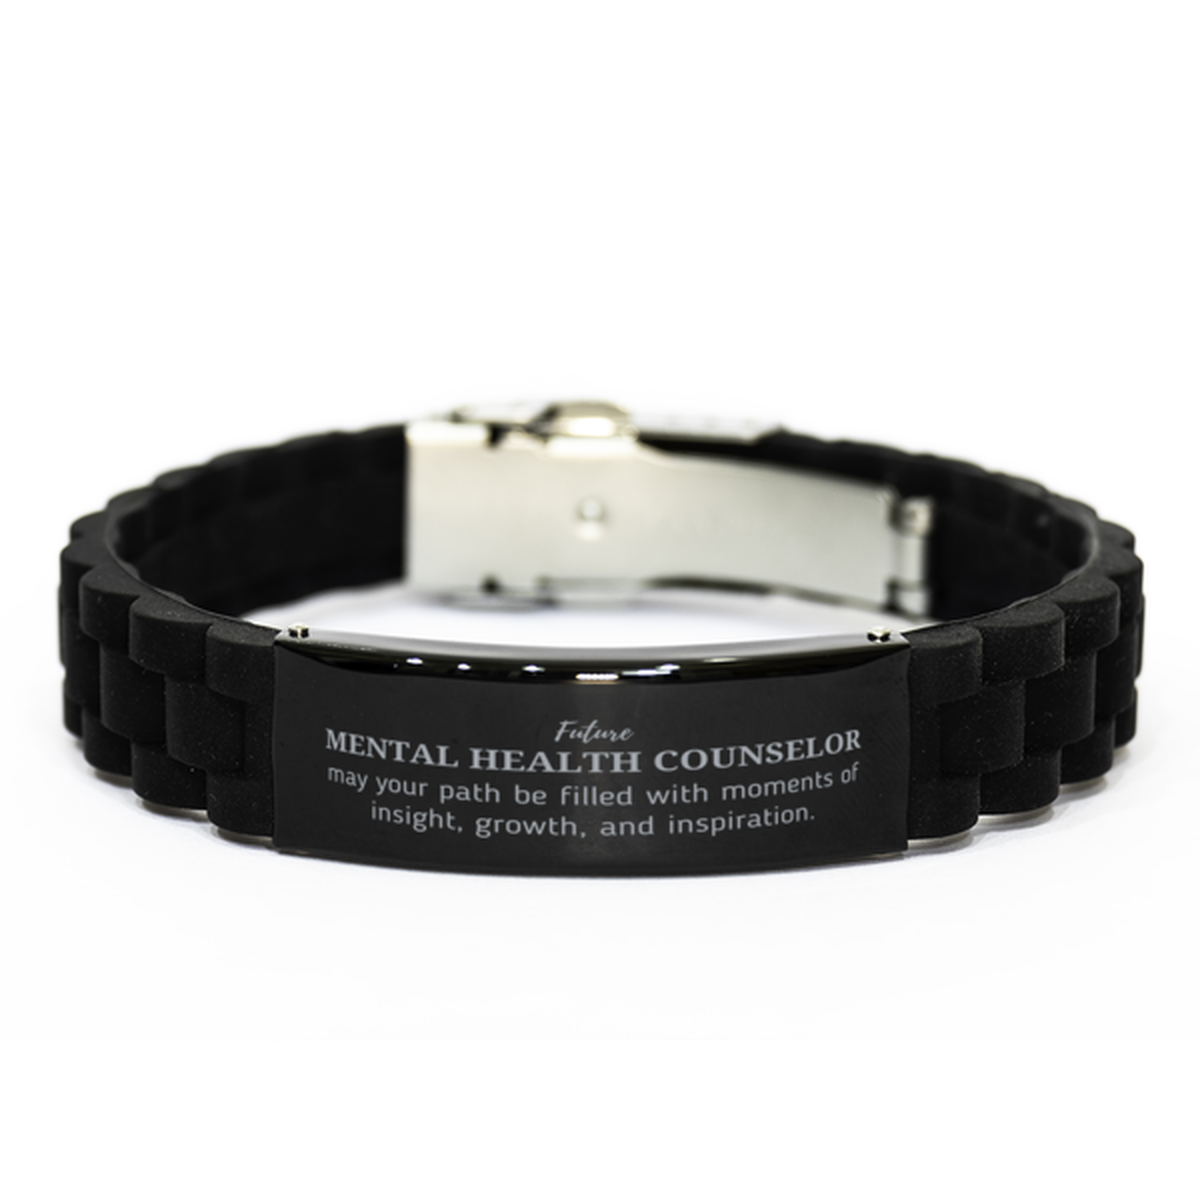 Future Mental Health Counselor Gifts, May your path be filled with moments of insight, Graduation Gifts for New Mental Health Counselor, Christmas Unique Black Glidelock Clasp Bracelet For Men, Women, Friends